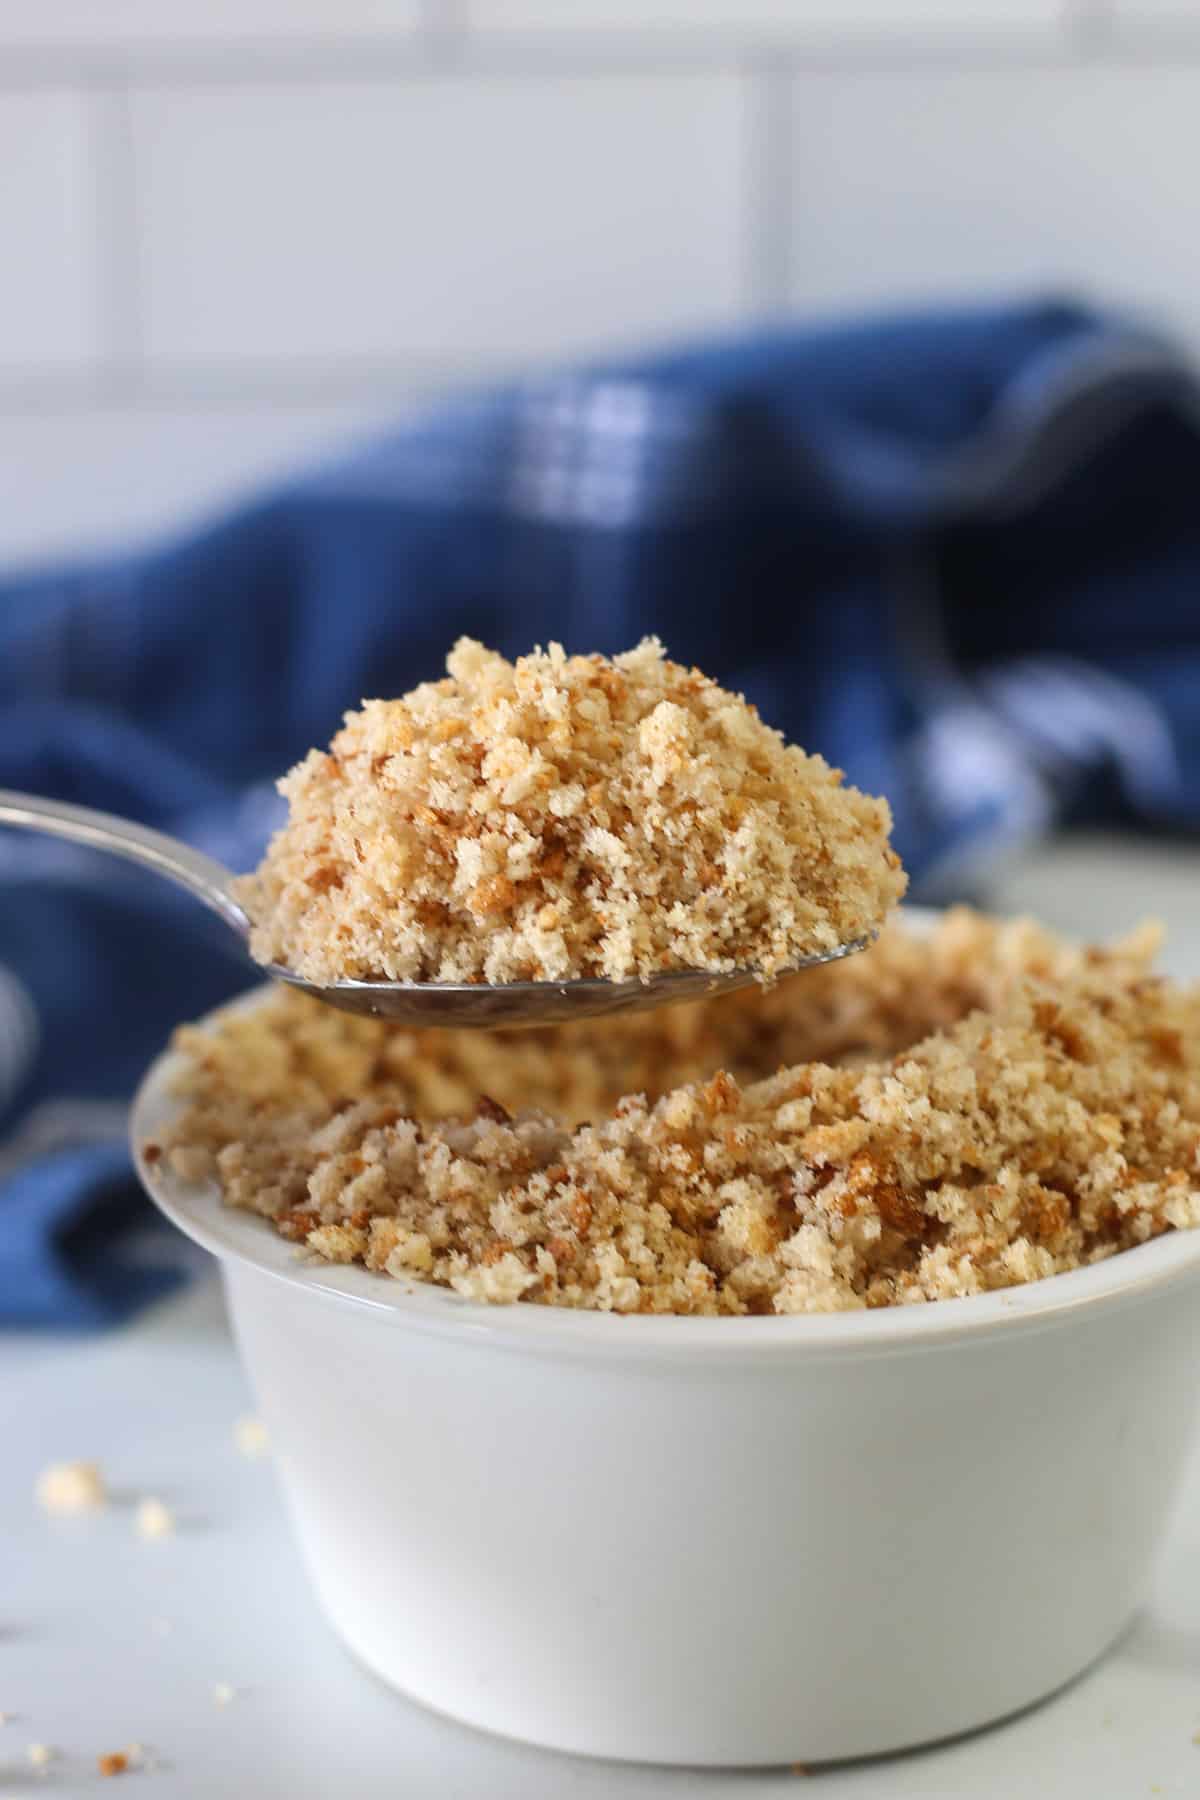 A spoonful of gluten-free breadcrumbs being scooped out of a bowl.